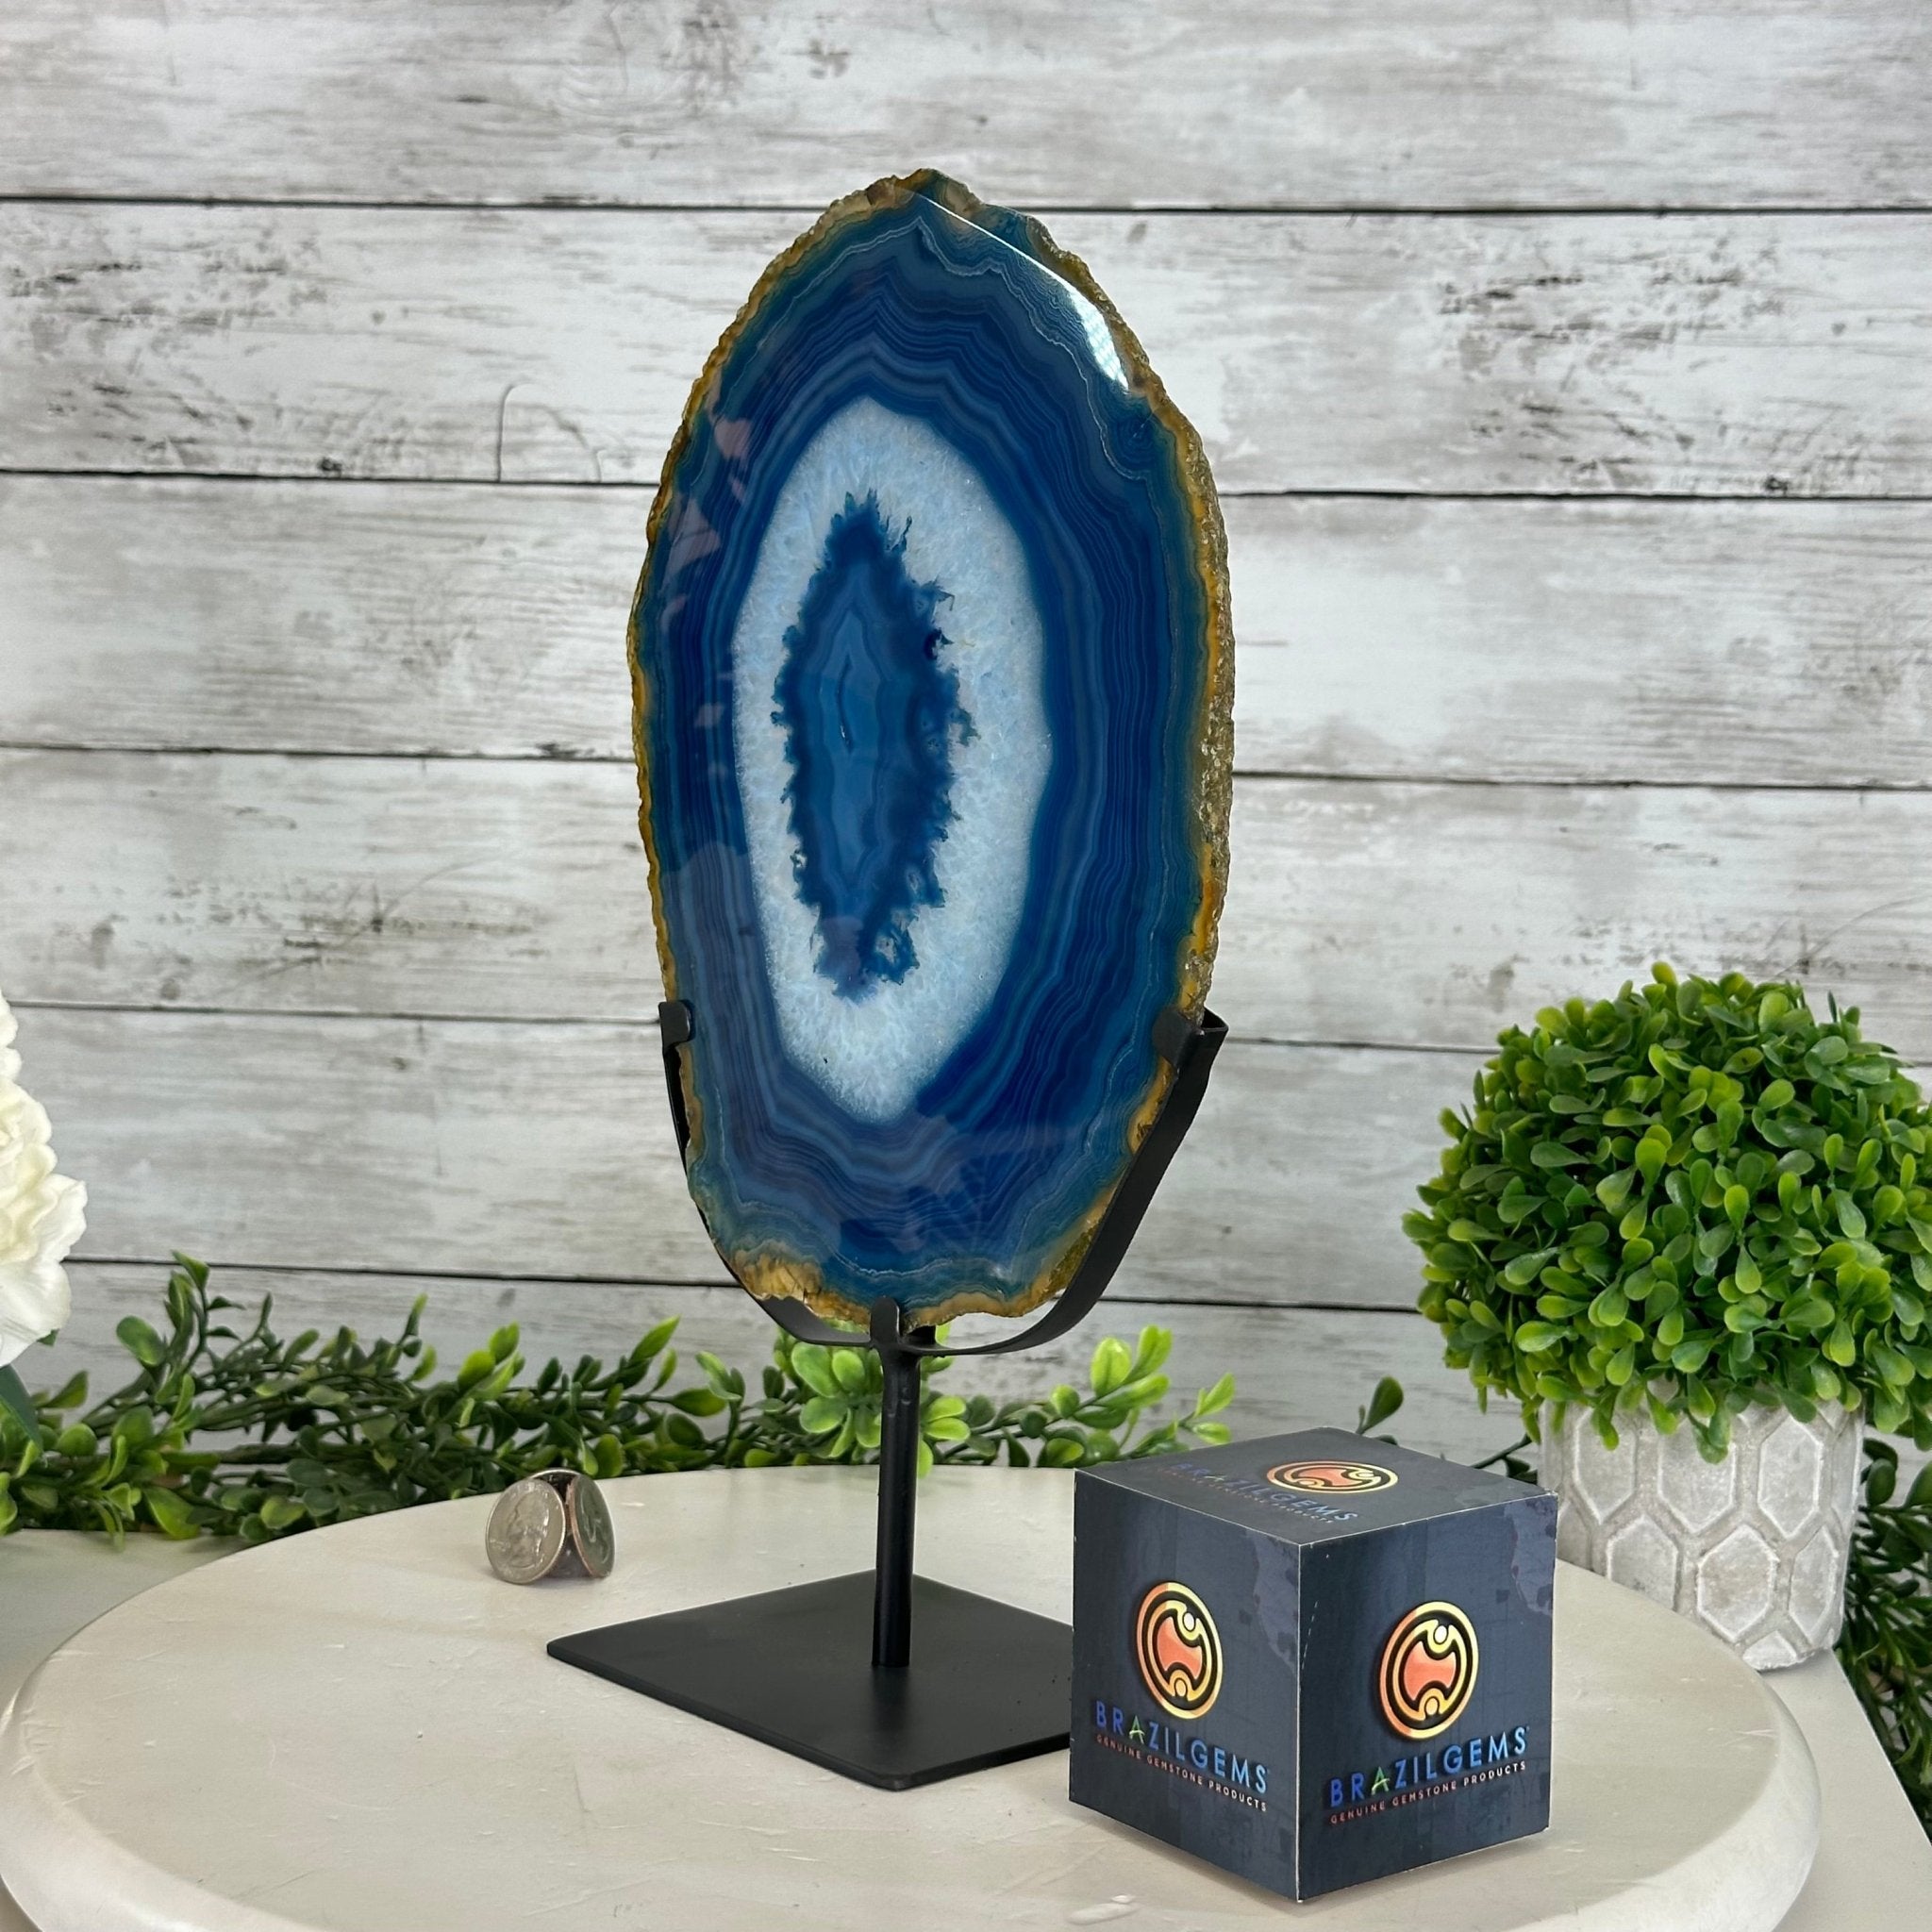 Brazilian Blue Agate Slice on a Metal Stand, 12.5" Tall #5055-0139 - Brazil GemsBrazil GemsBrazilian Blue Agate Slice on a Metal Stand, 12.5" Tall #5055-0139Slices on Fixed Bases5055-0139